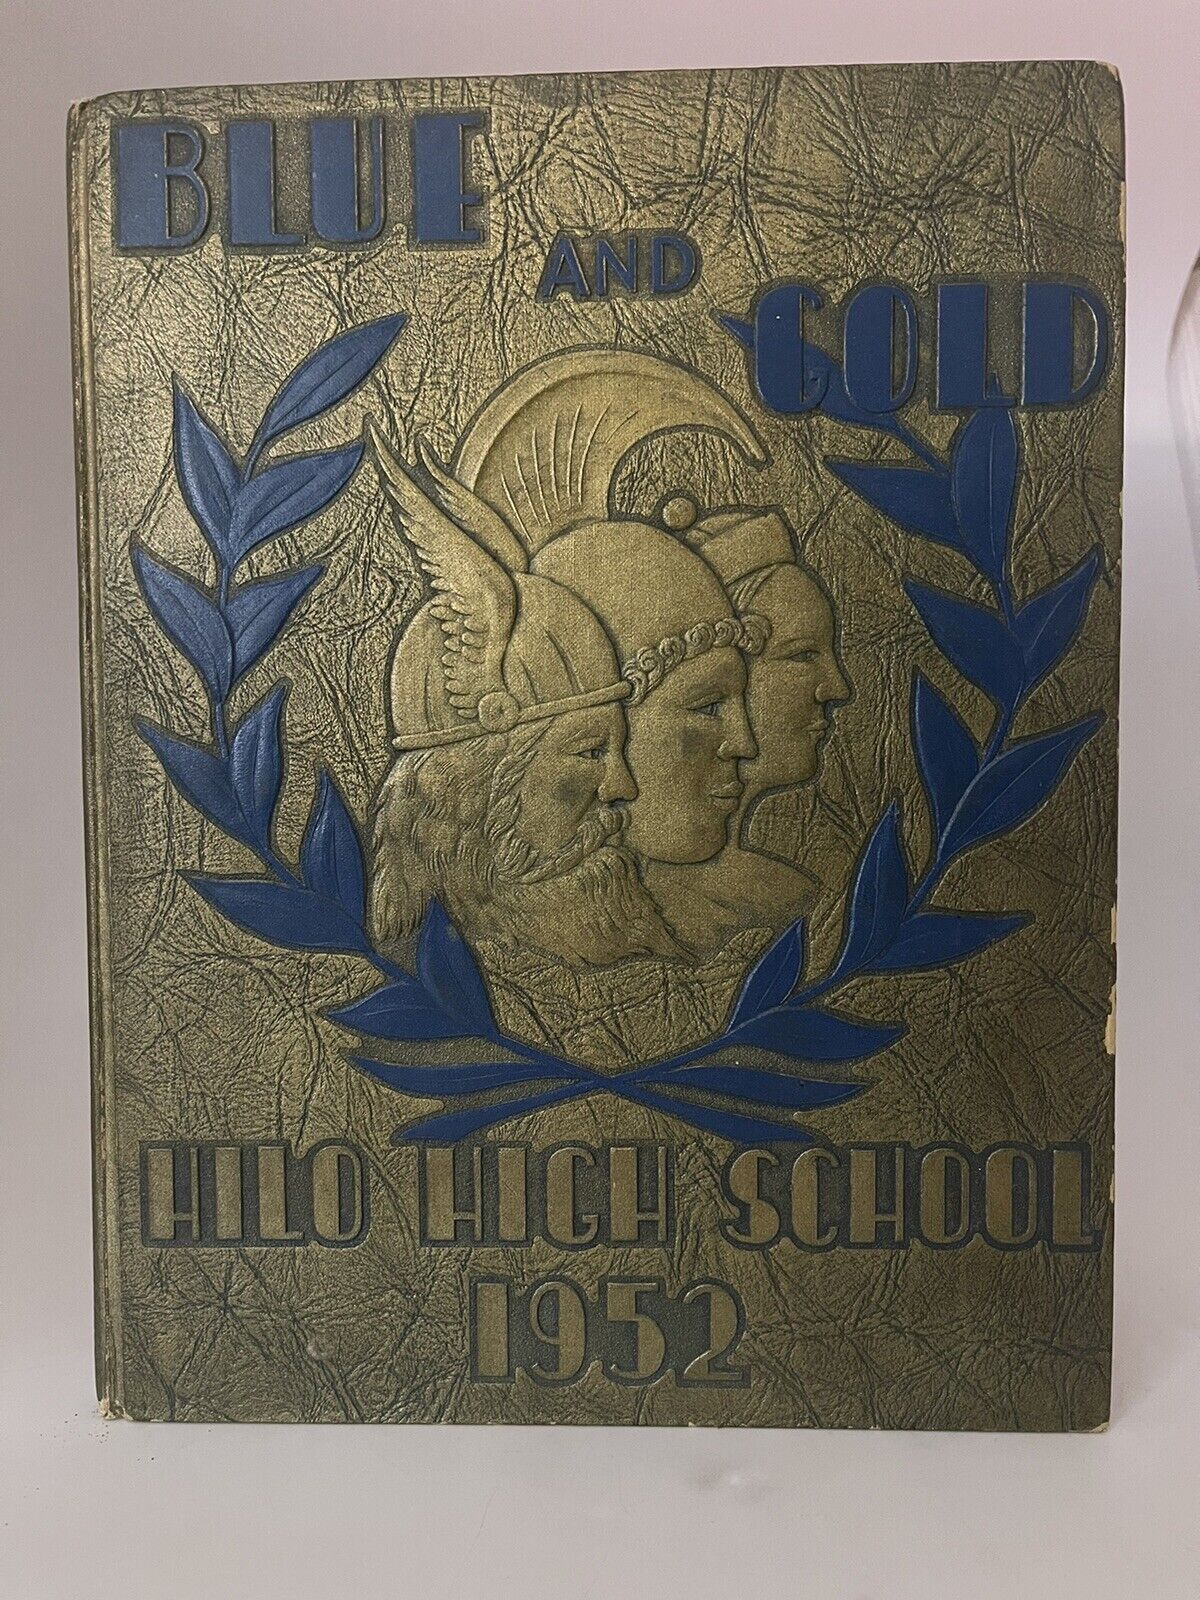 Hilo High School 1952 Yearbook Annual Blue and Gold Hawaii Vintage